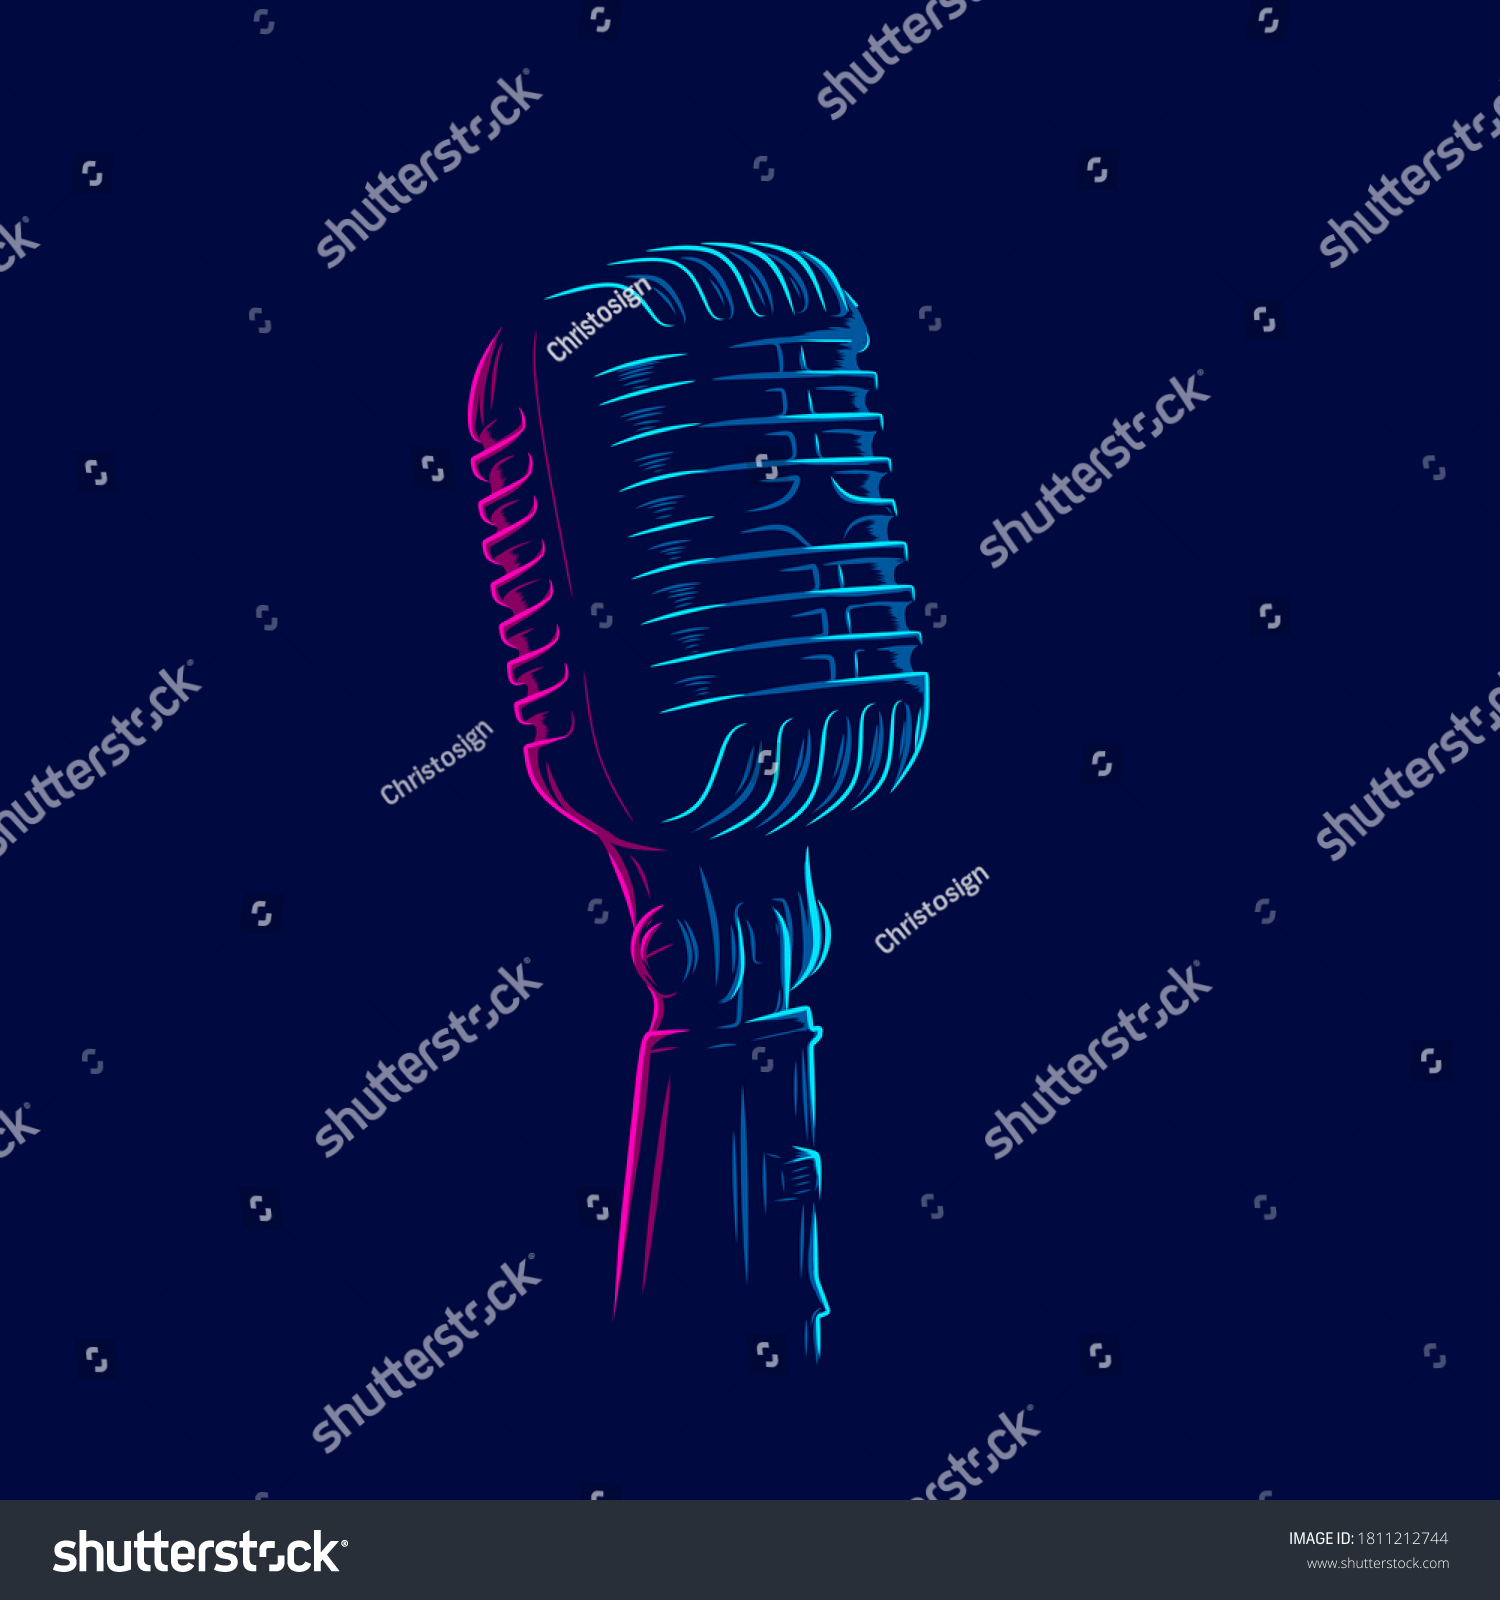 microphone vintage retro mic line pop art potrait logo colorful design with dark background. Abstract vector illustration. #1811212744